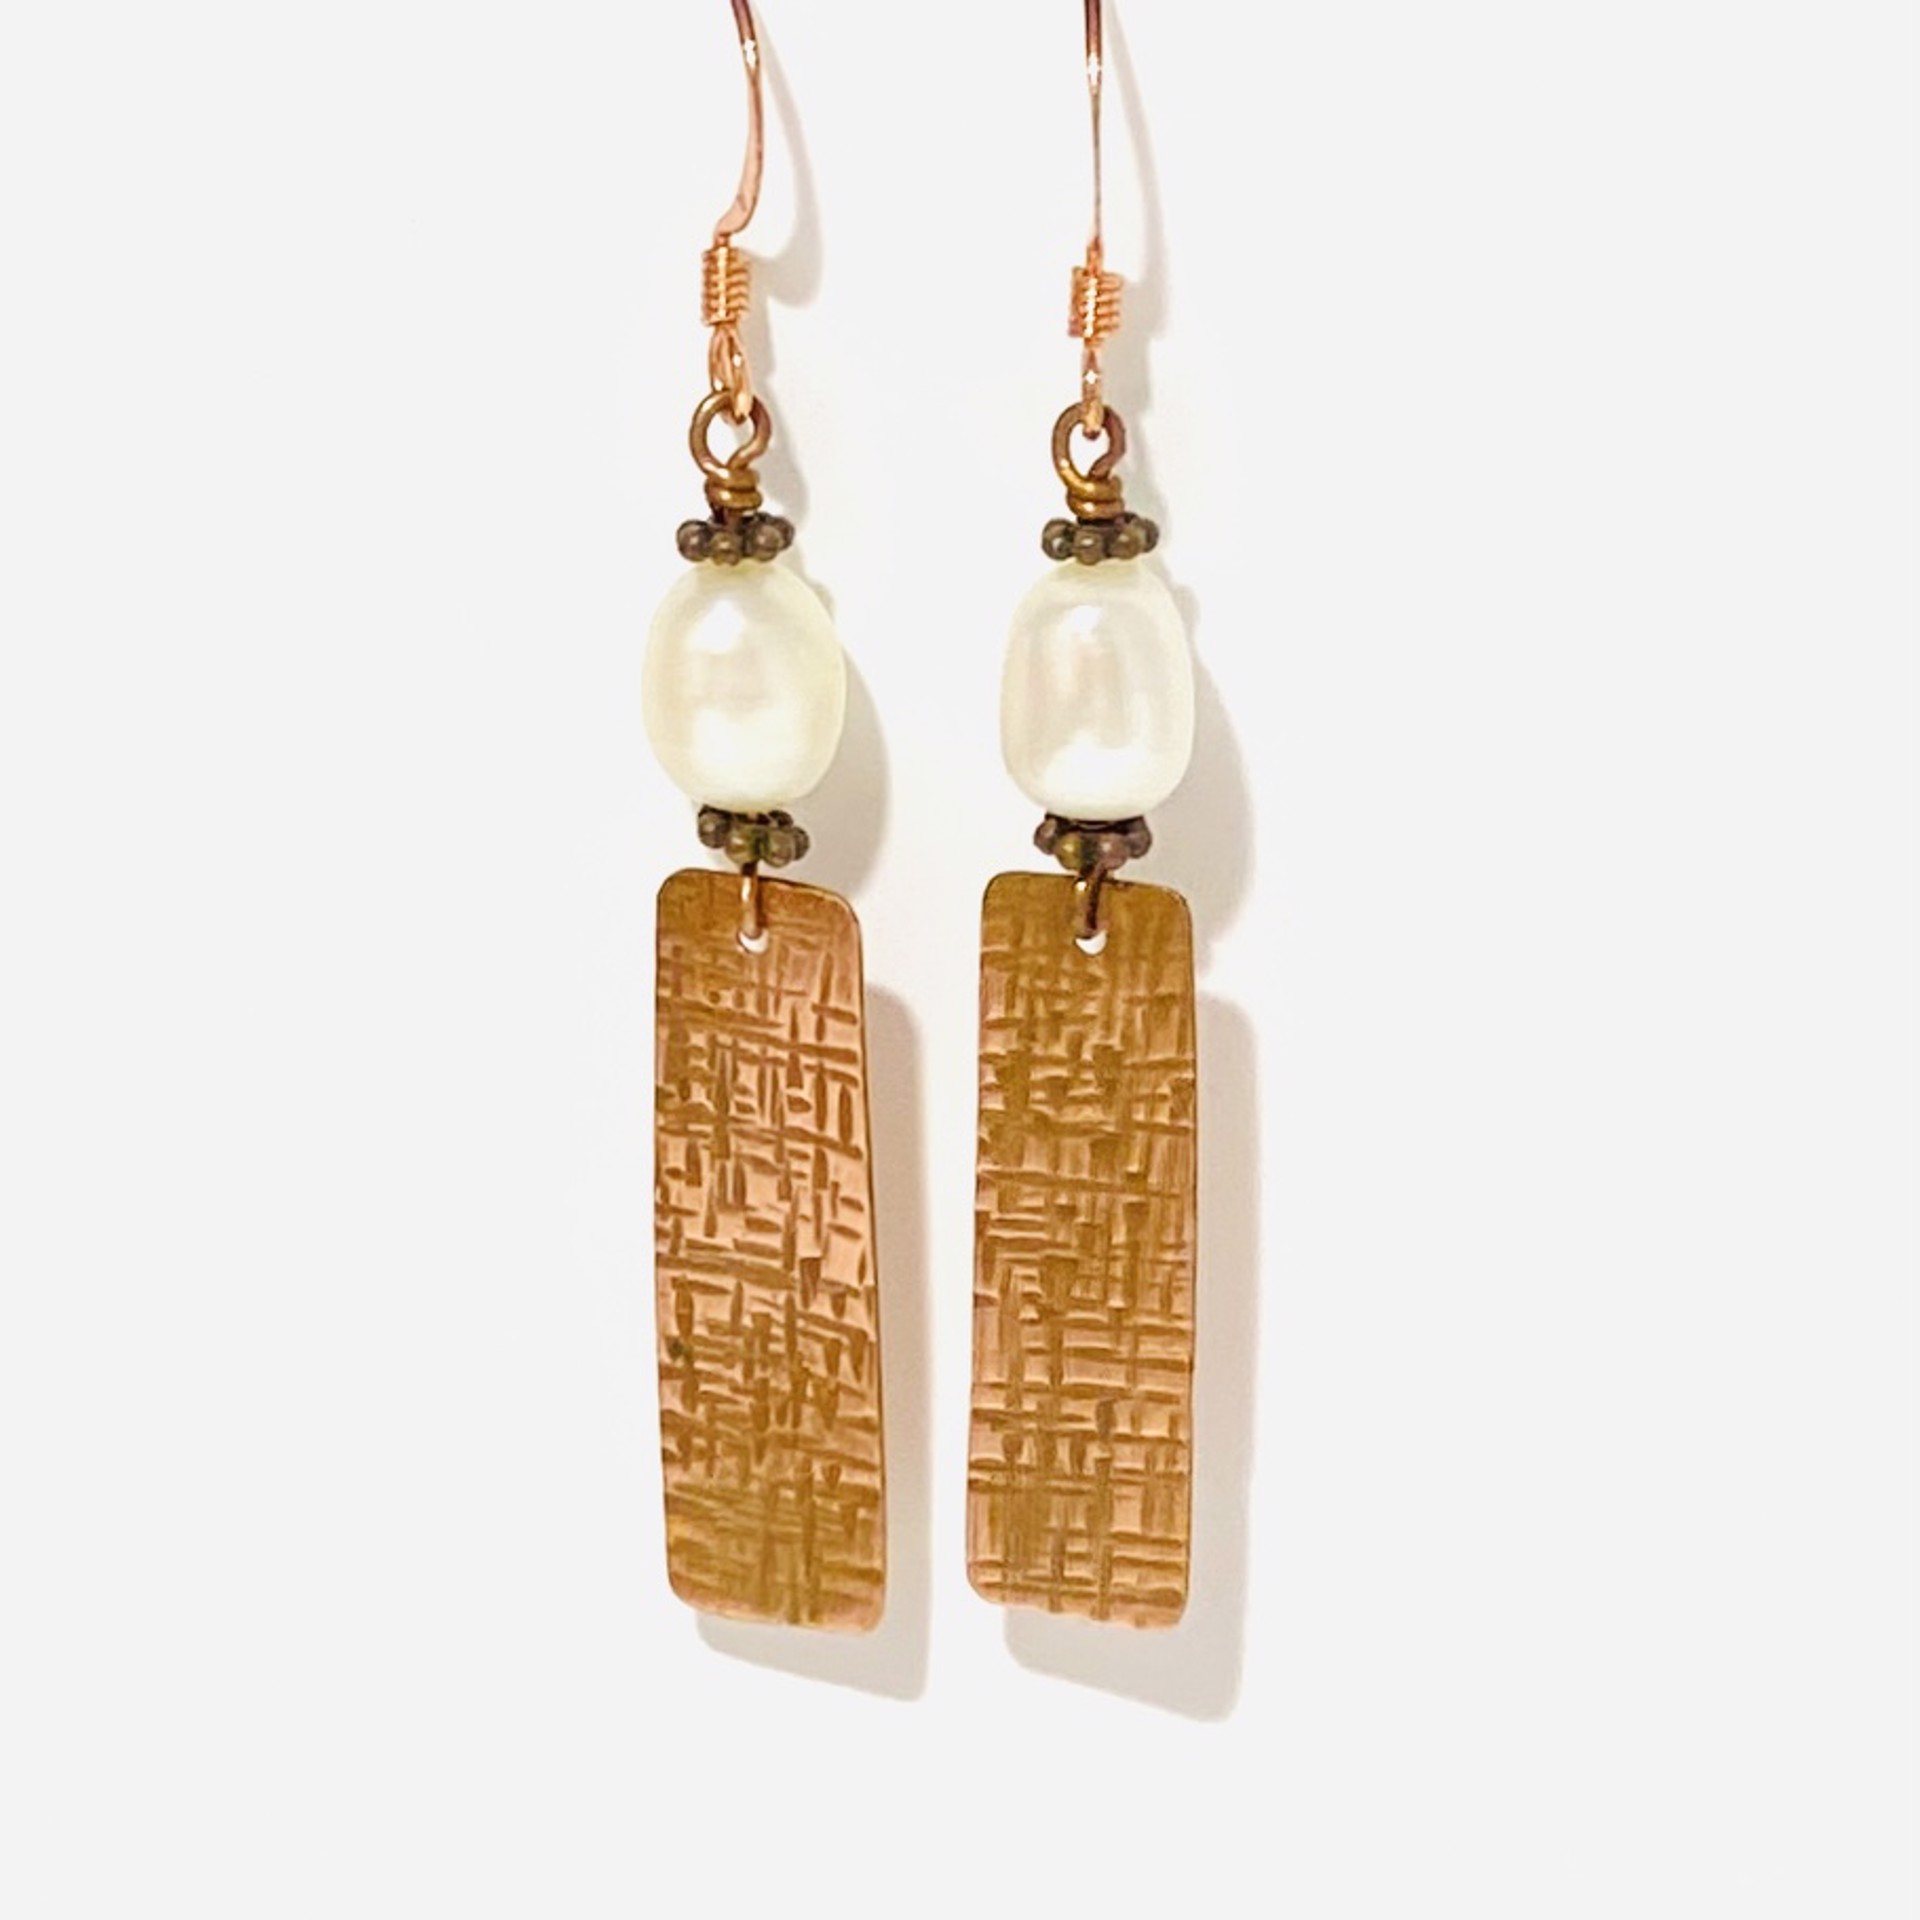 Hammered Copper, Pearl Earrings LR23-43 by Legare Riano